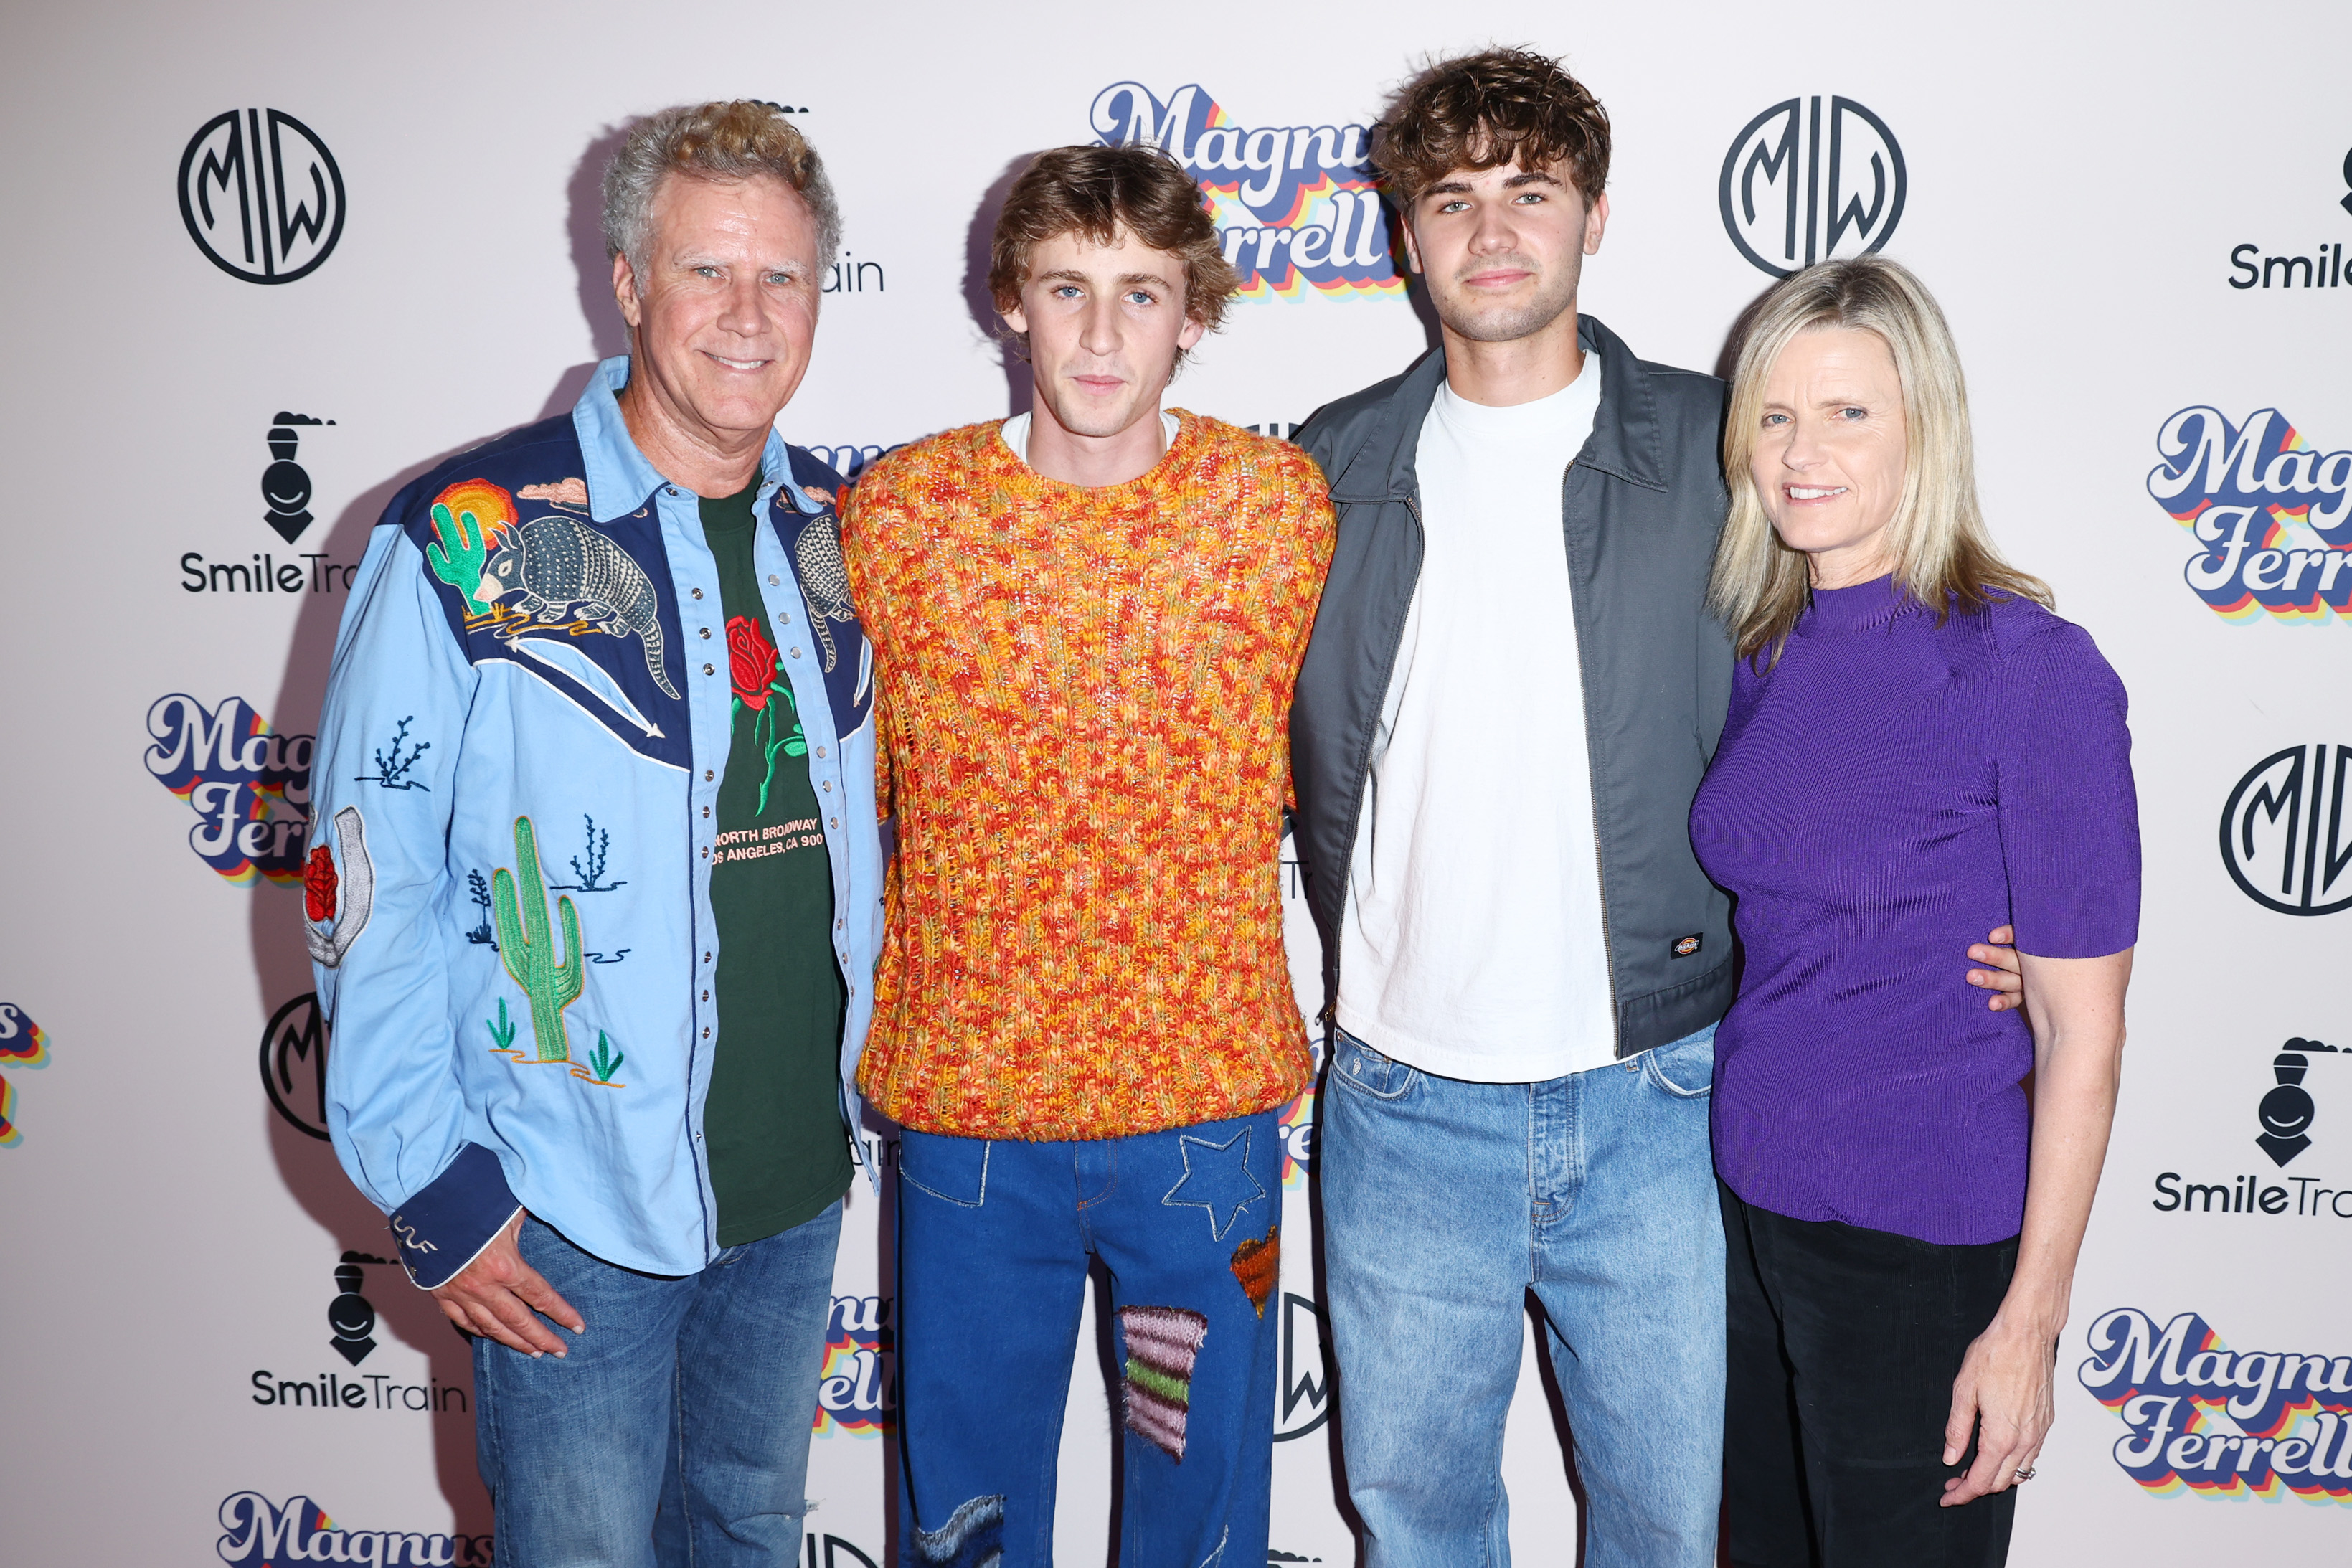 With their children at a media event